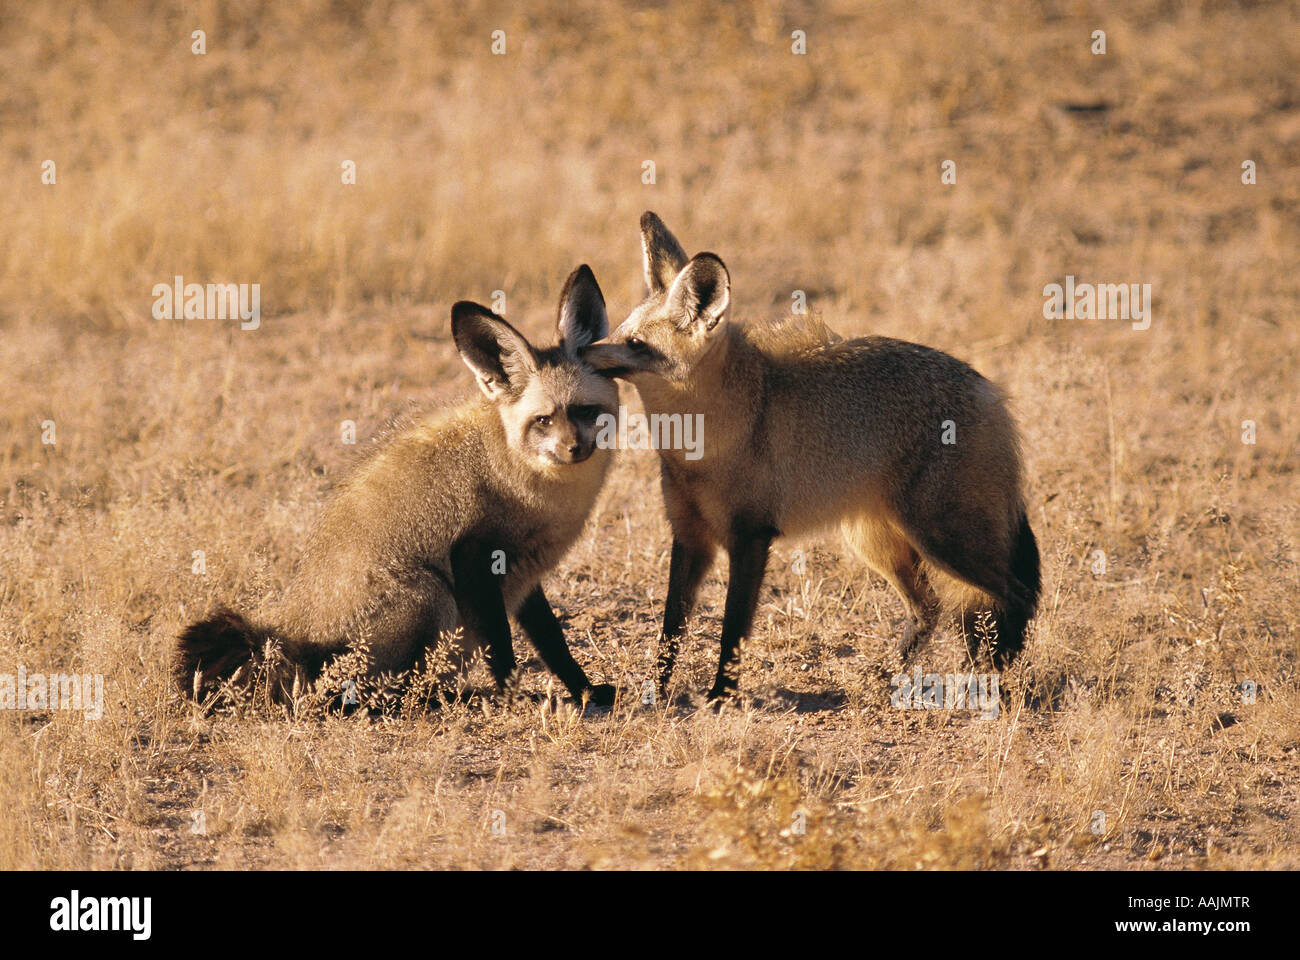 Two Bat eared Foxes grooming each other in Kalahari National Park Northern Cape South Africa Stock Photo